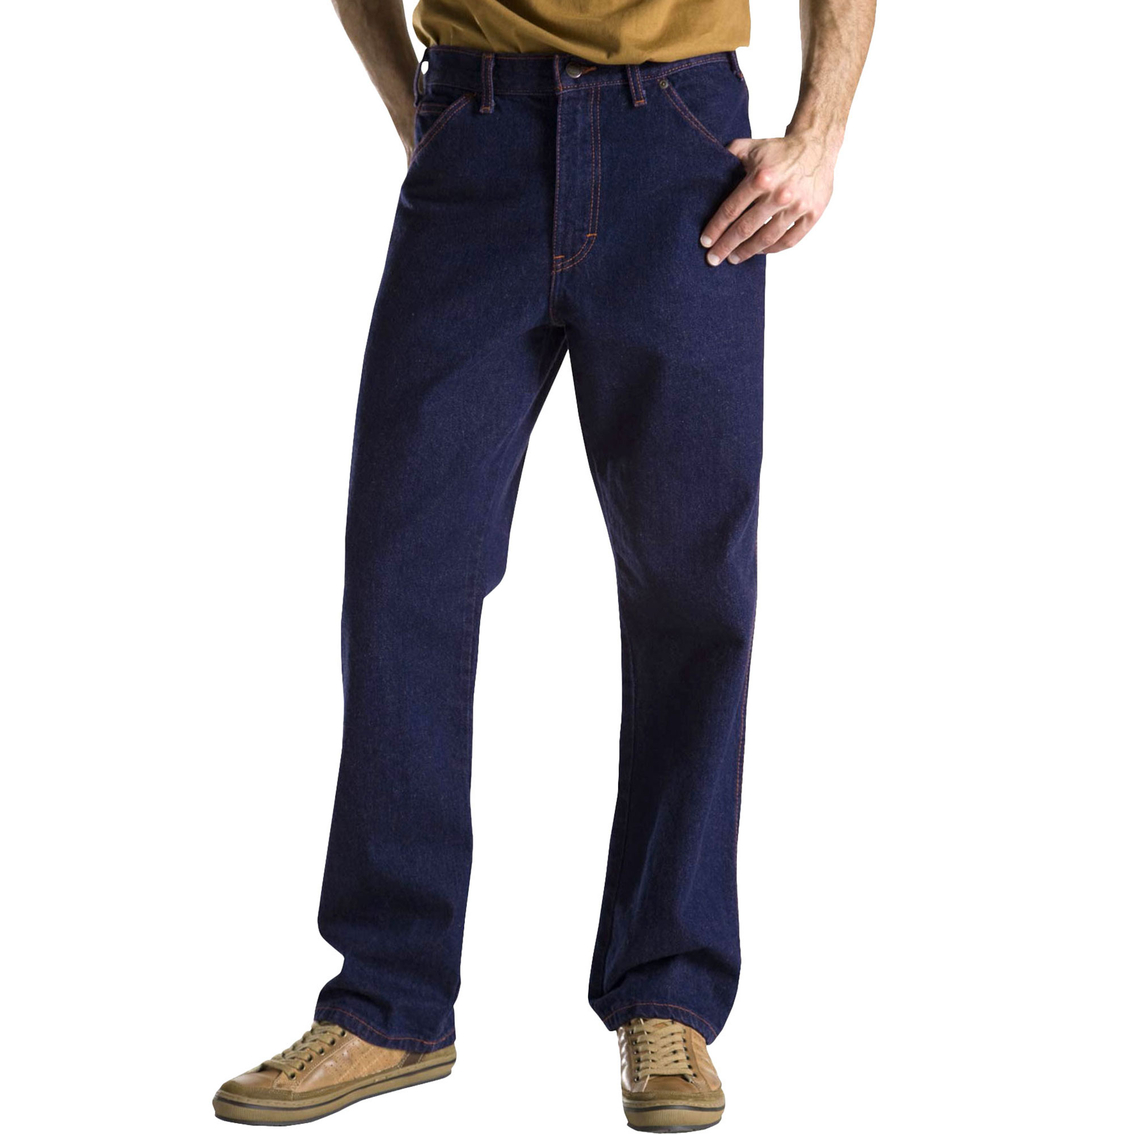 Dickies 5 Pocket Denim Jeans | Jeans | Clothing & Accessories | Shop ...